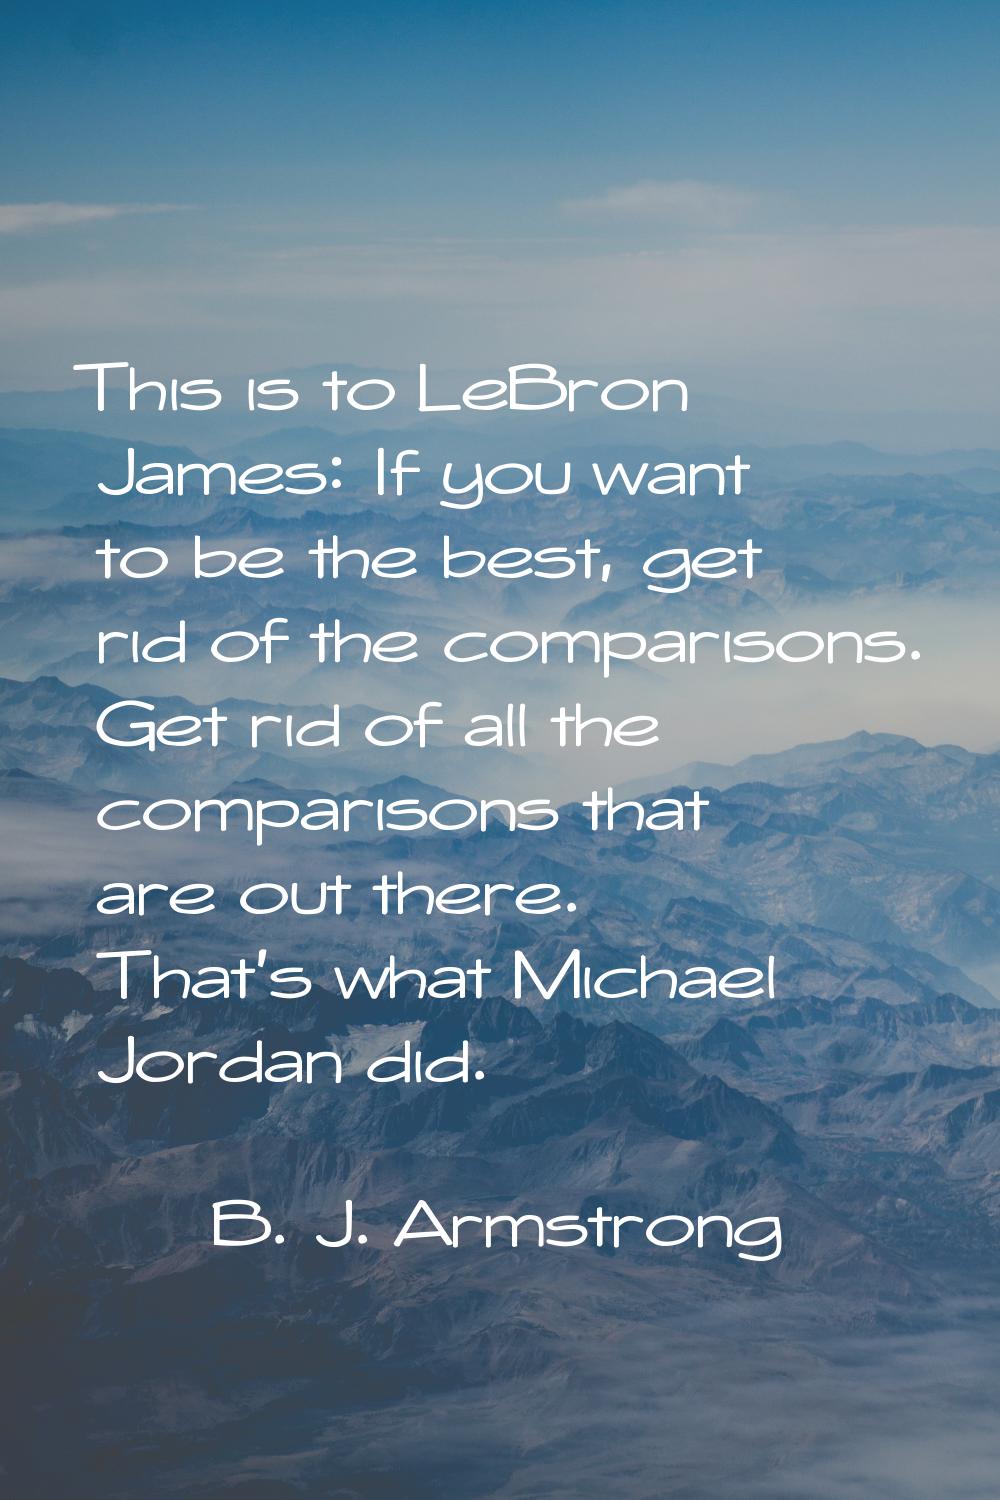 This is to LeBron James: If you want to be the best, get rid of the comparisons. Get rid of all the